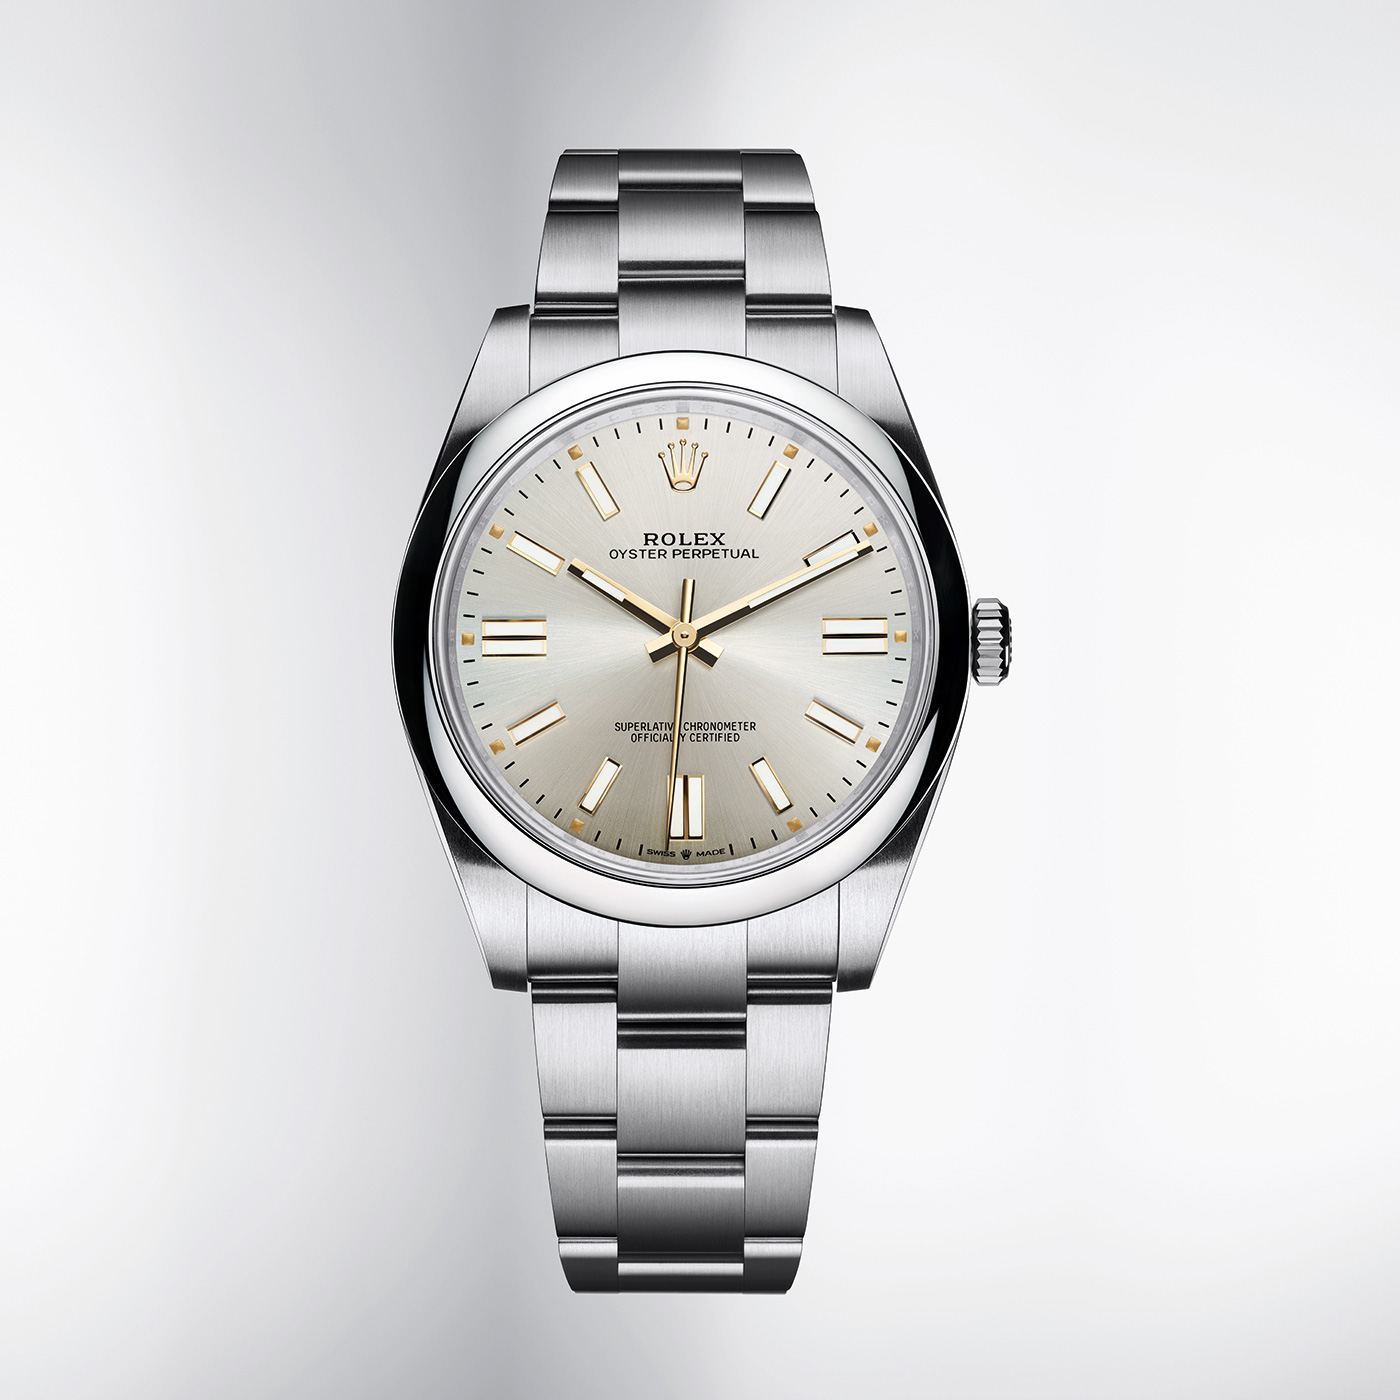 The New Rolex Oyster Perpetual – BEXSONN